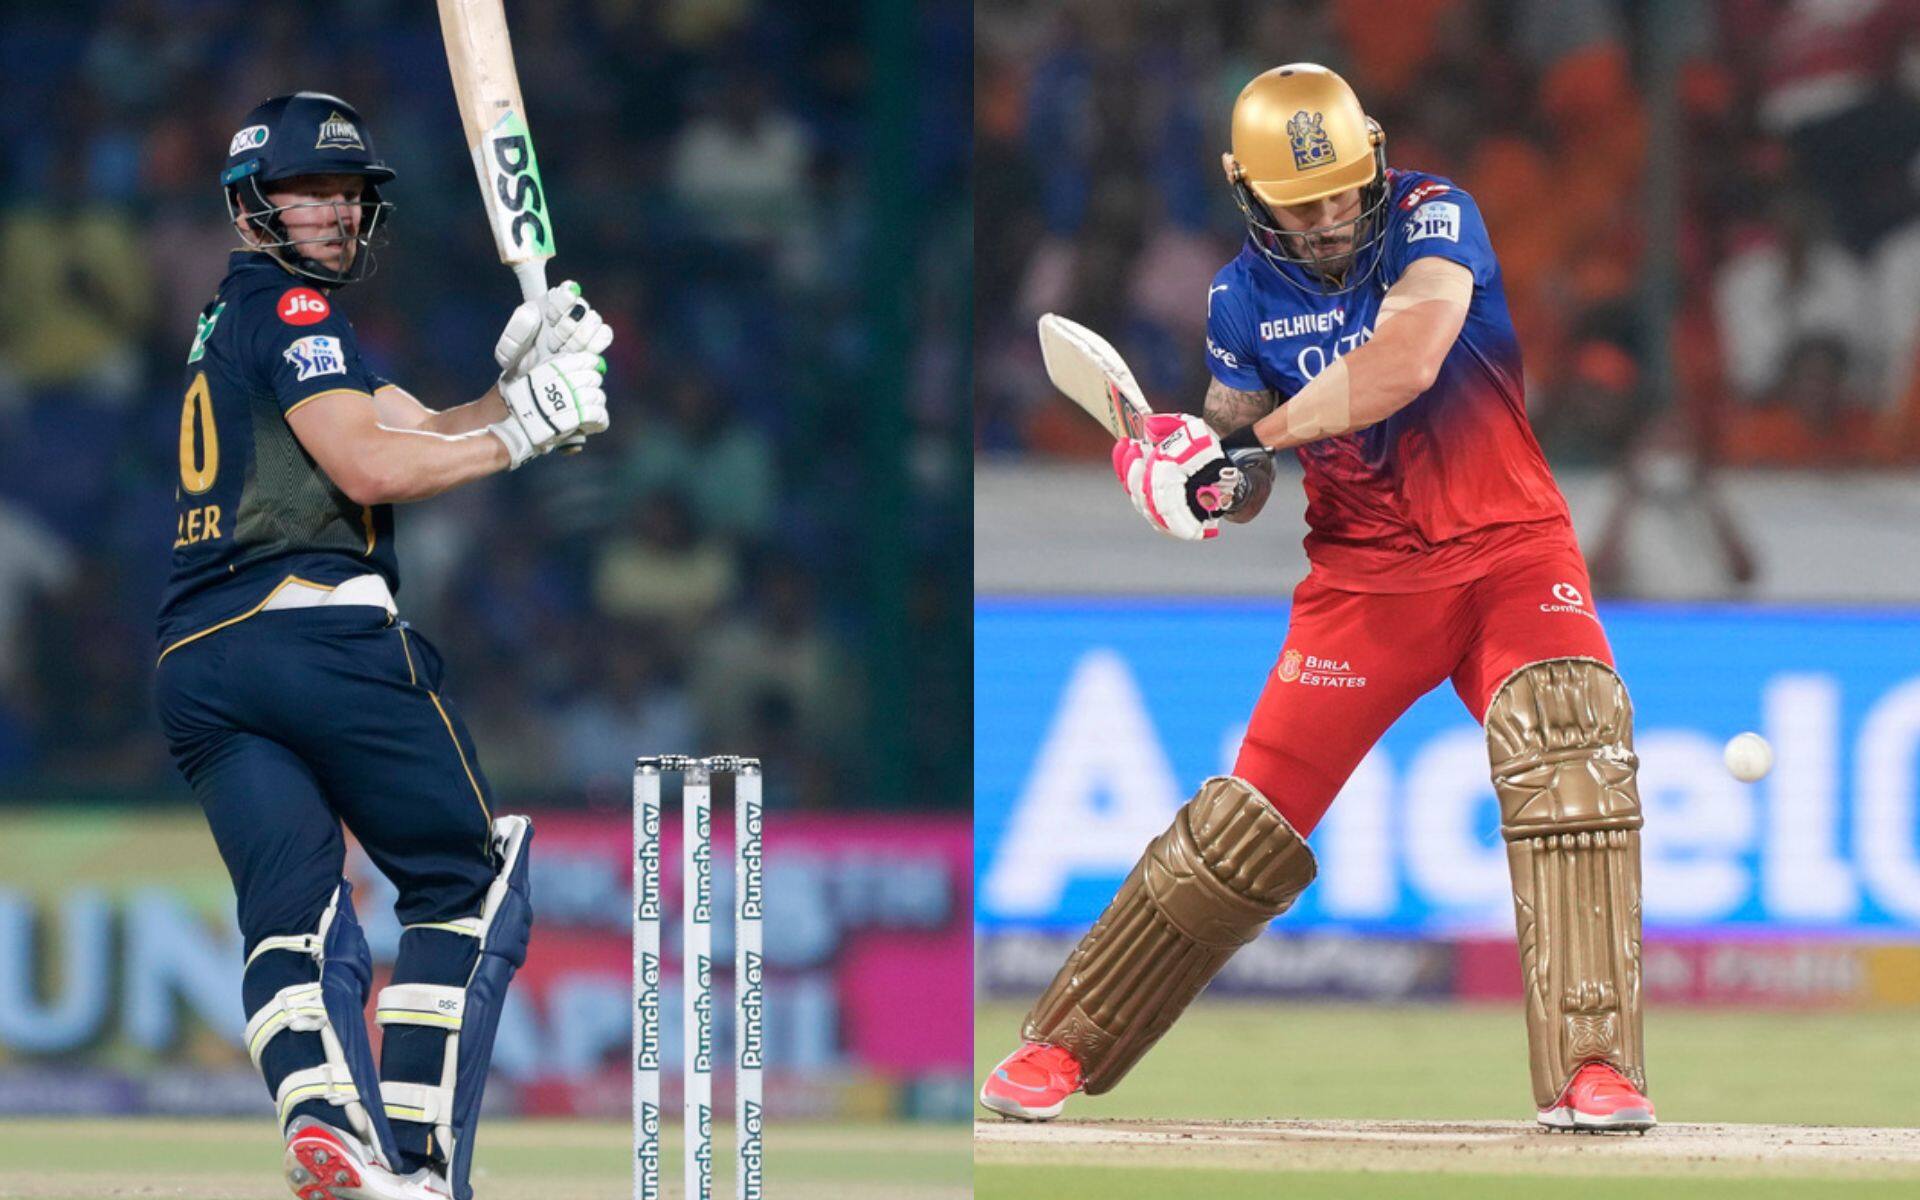 David Miller and Faf du Plessis will be crucial to their team's chances in the game [AP Photos]